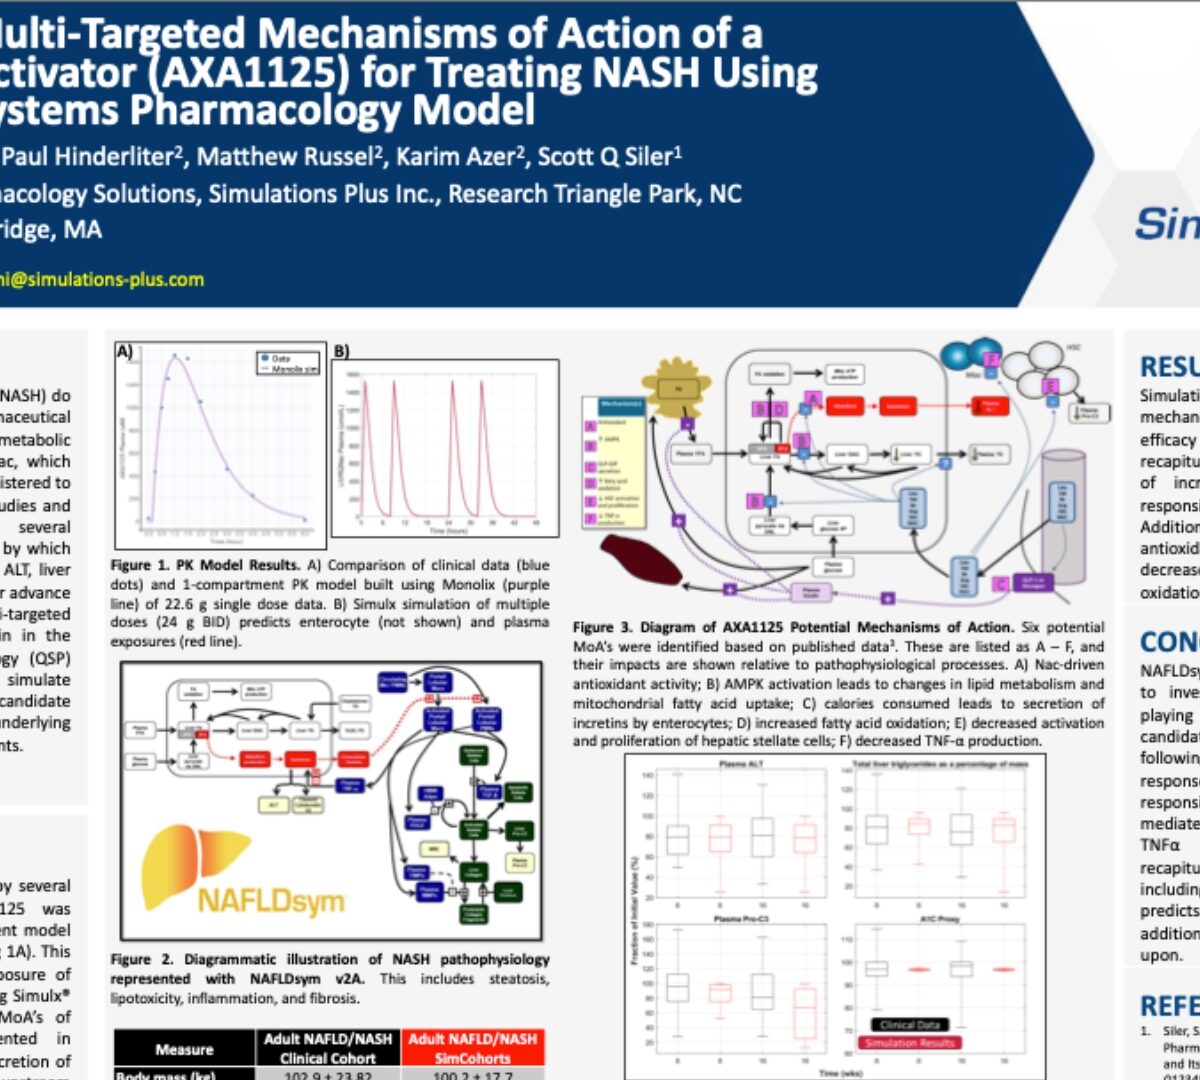 Advancing the Multi-Targeted Mechanisms of Action of a Mitochondrial Activator (AXA1125) for Treating NASH Using a Quantitative Systems Pharmacology Model